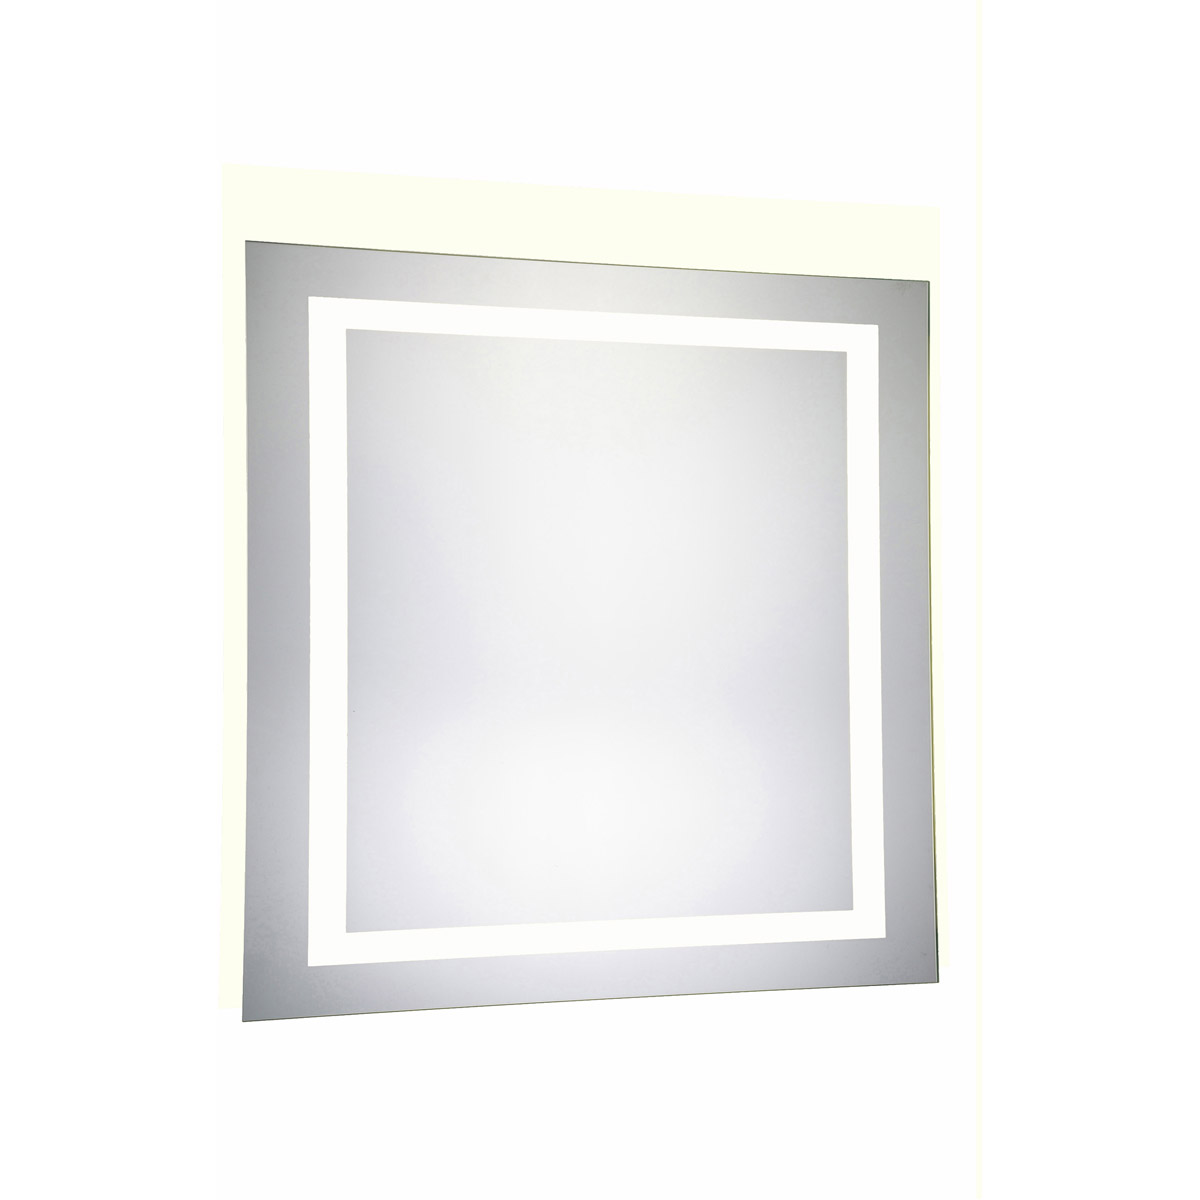 4 Sides Led Electric Mirror Rectangle Dimmable 5000k - 36 X 36 In.